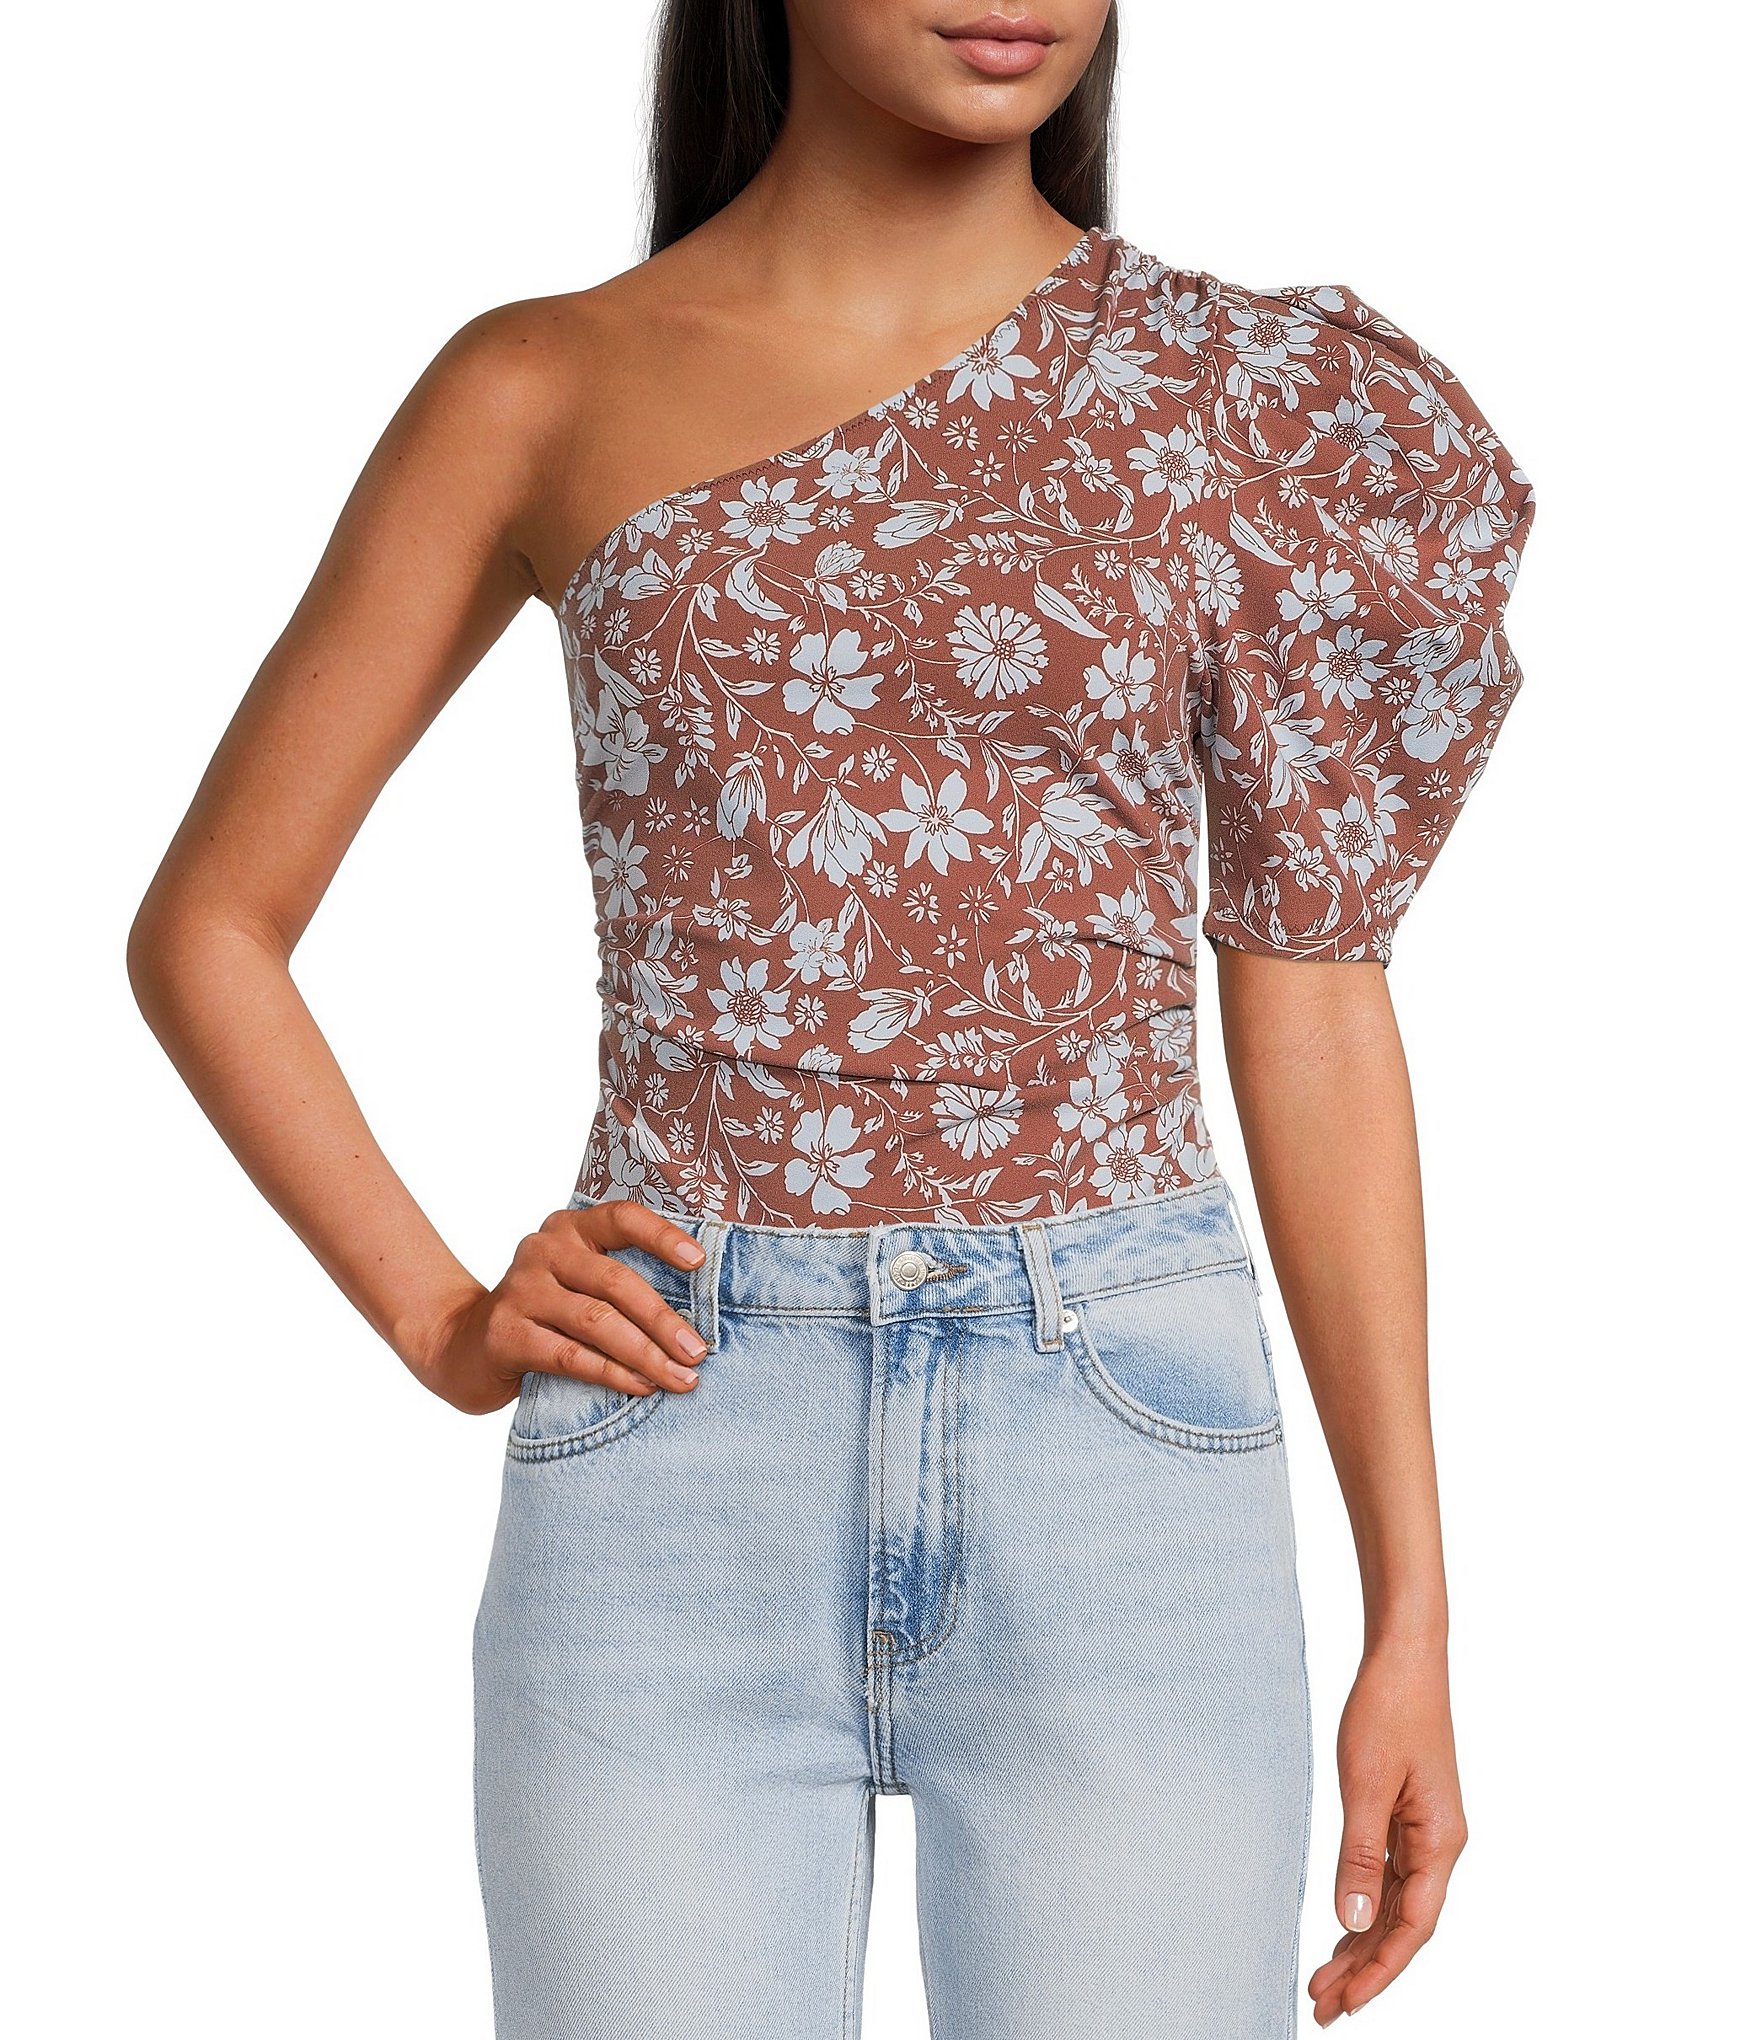 Free People Somethin Bout You One-Shoulder Bodysuit